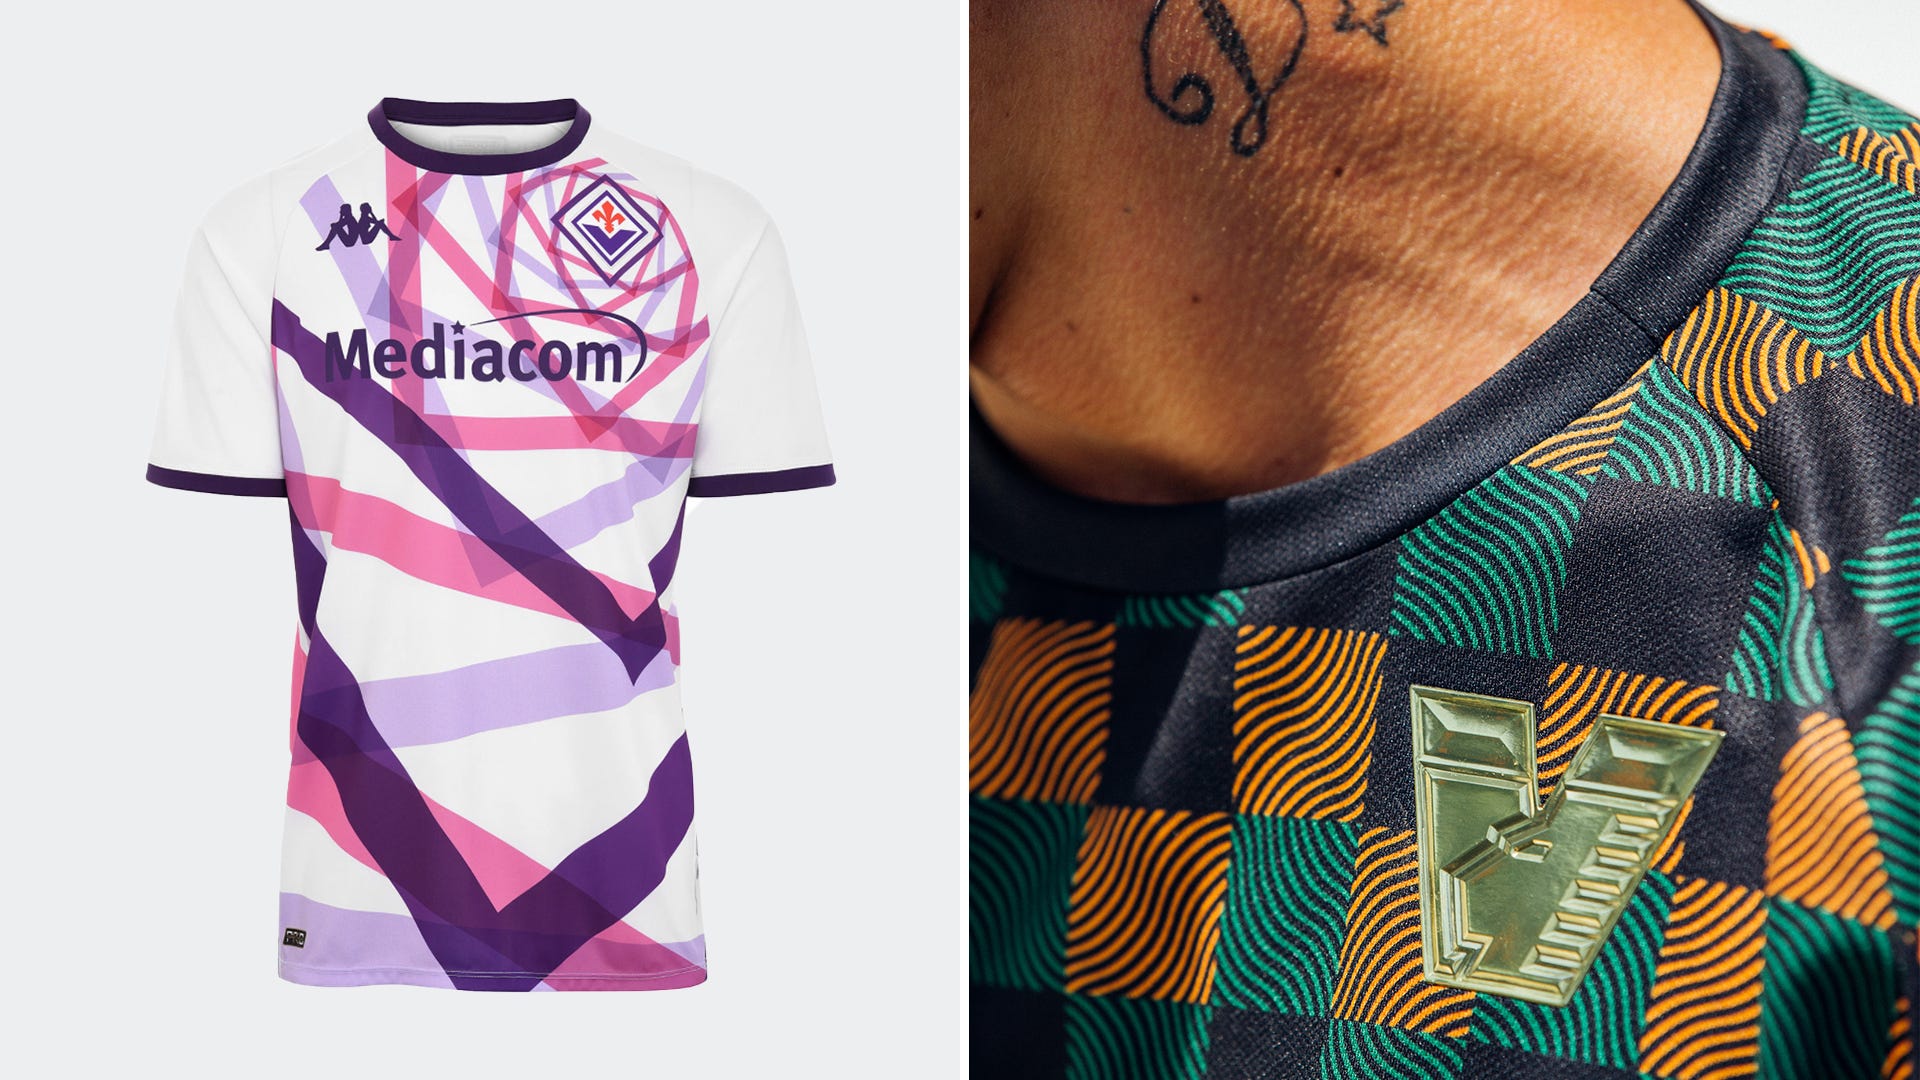 The rise and rise of pre-match kits